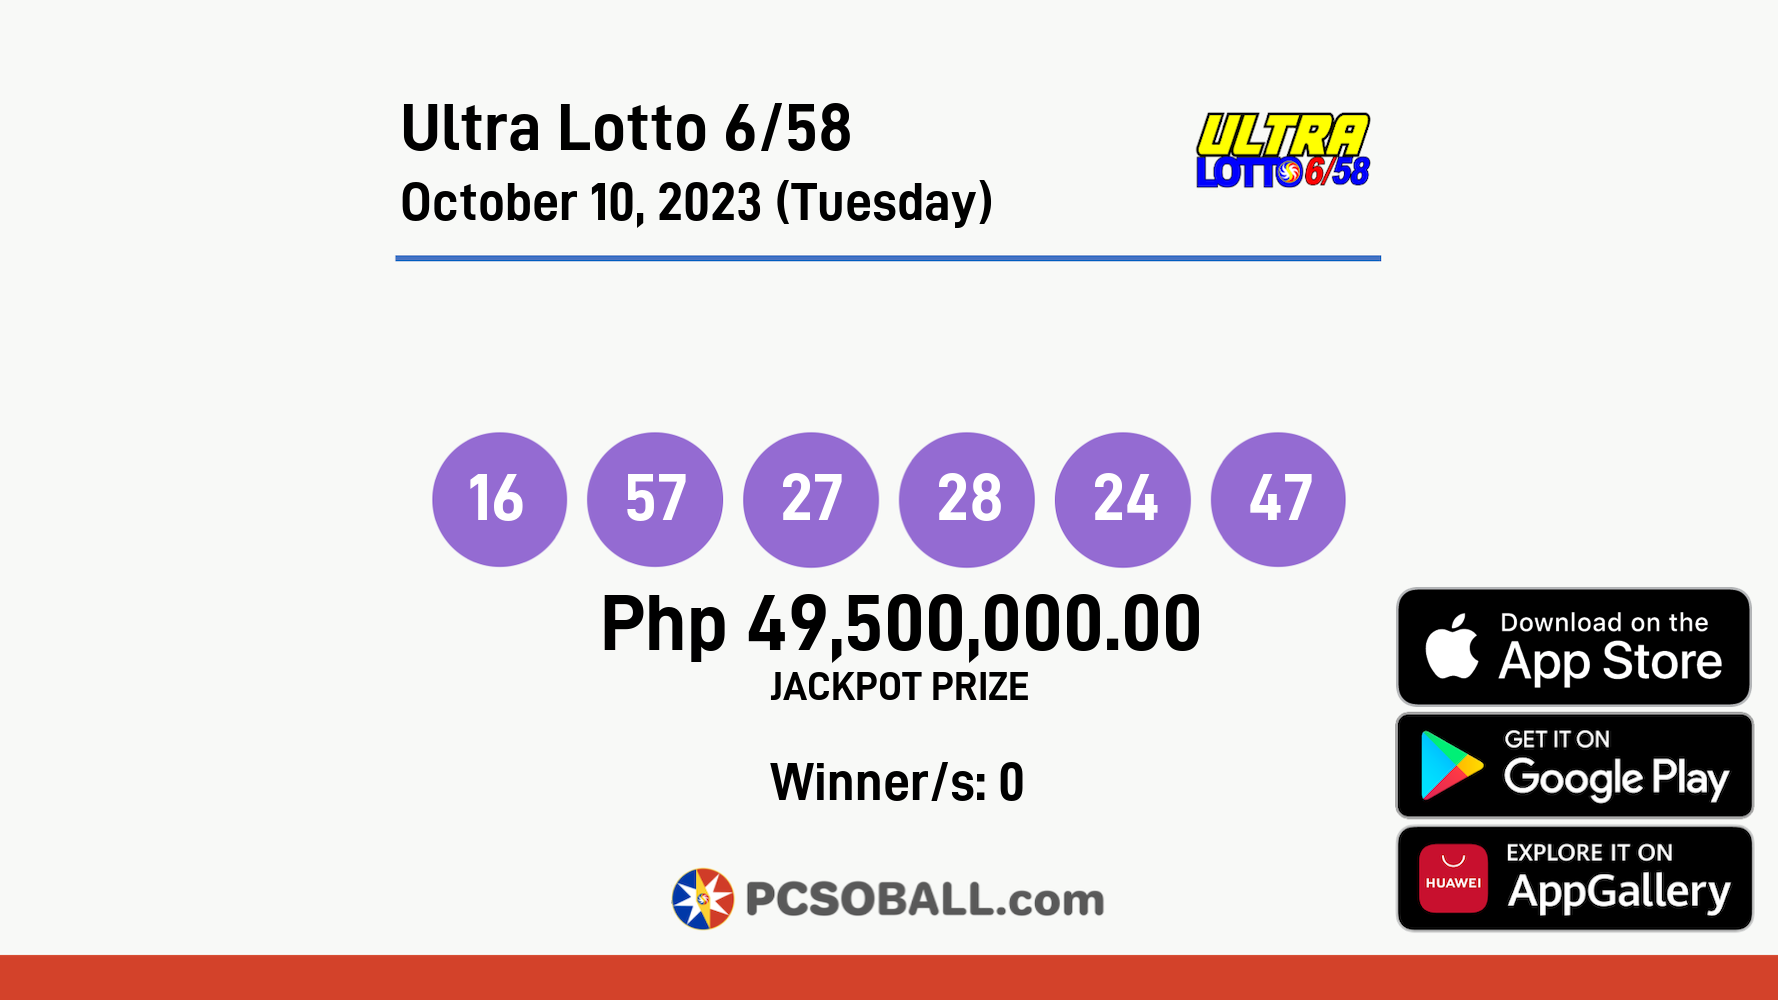 Ultra Lotto 6/58 October 10, 2023 (Tuesday) Result